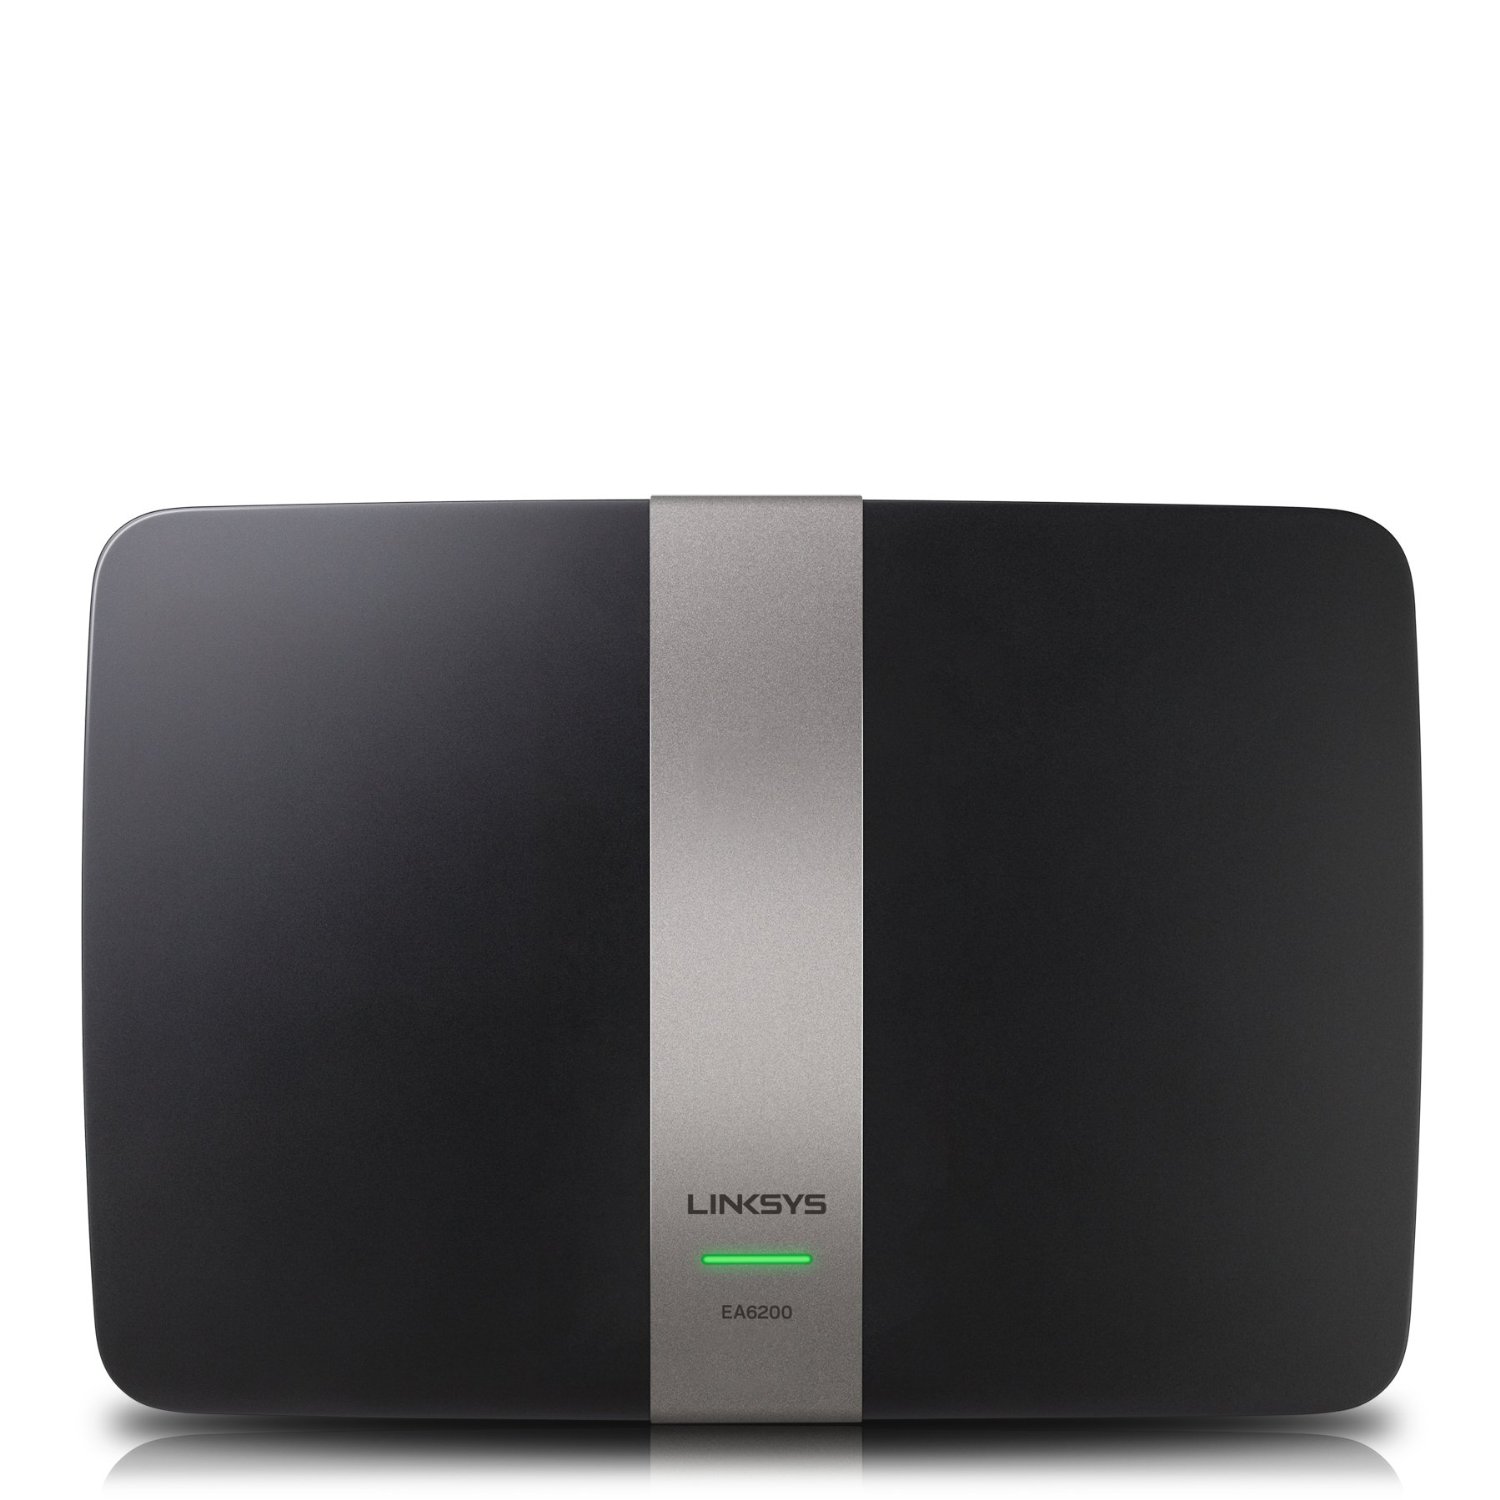 Download firmware for linksys routers